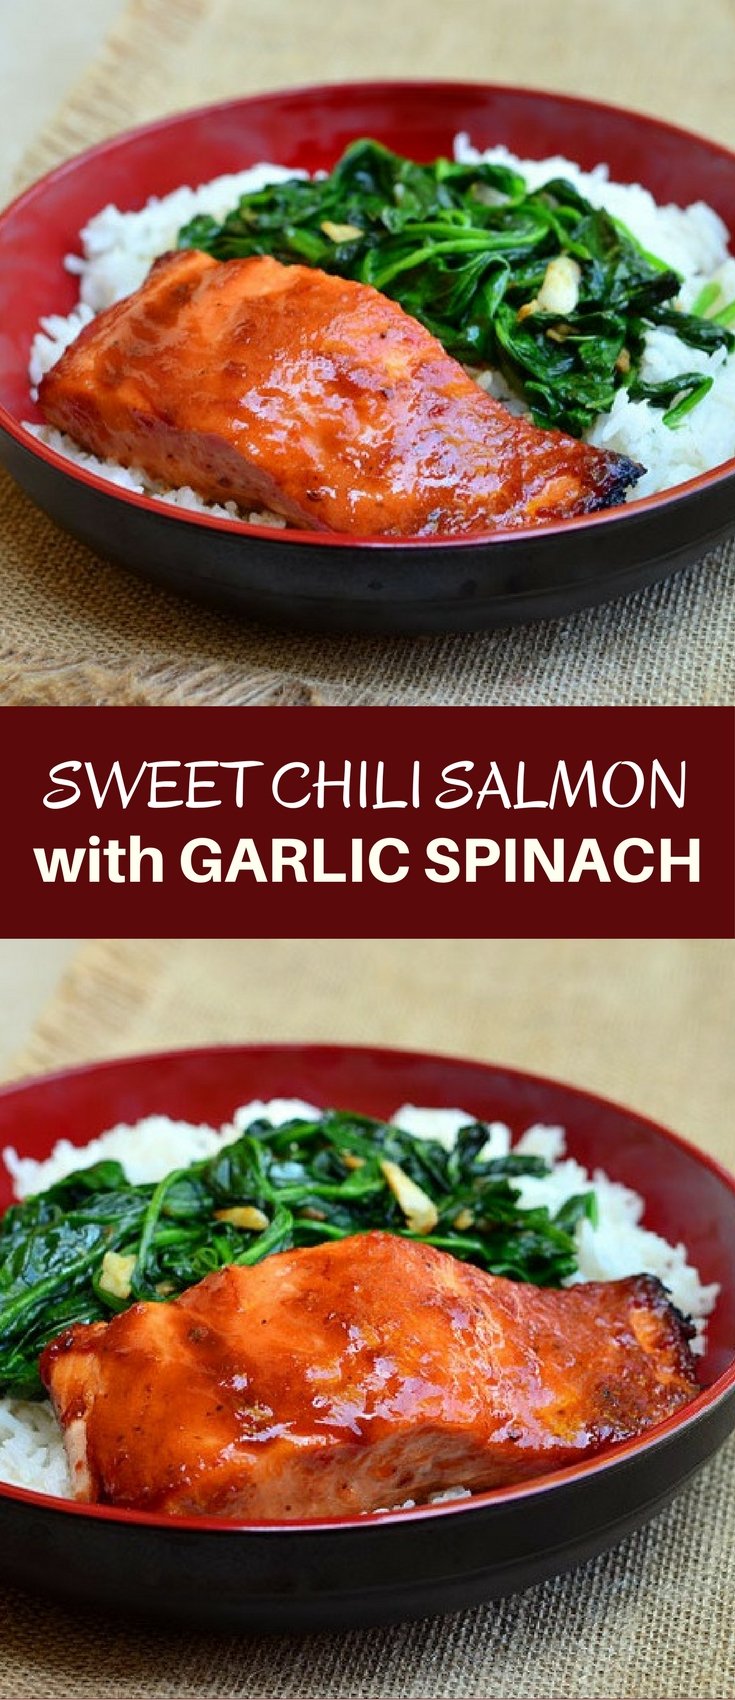 Sweet Chili Salmon with Garlic Spinach topped with sweet chili glaze and served over a bed of garlicky spinach. It makes a flavorful dinner meal and it's ready in minutes!